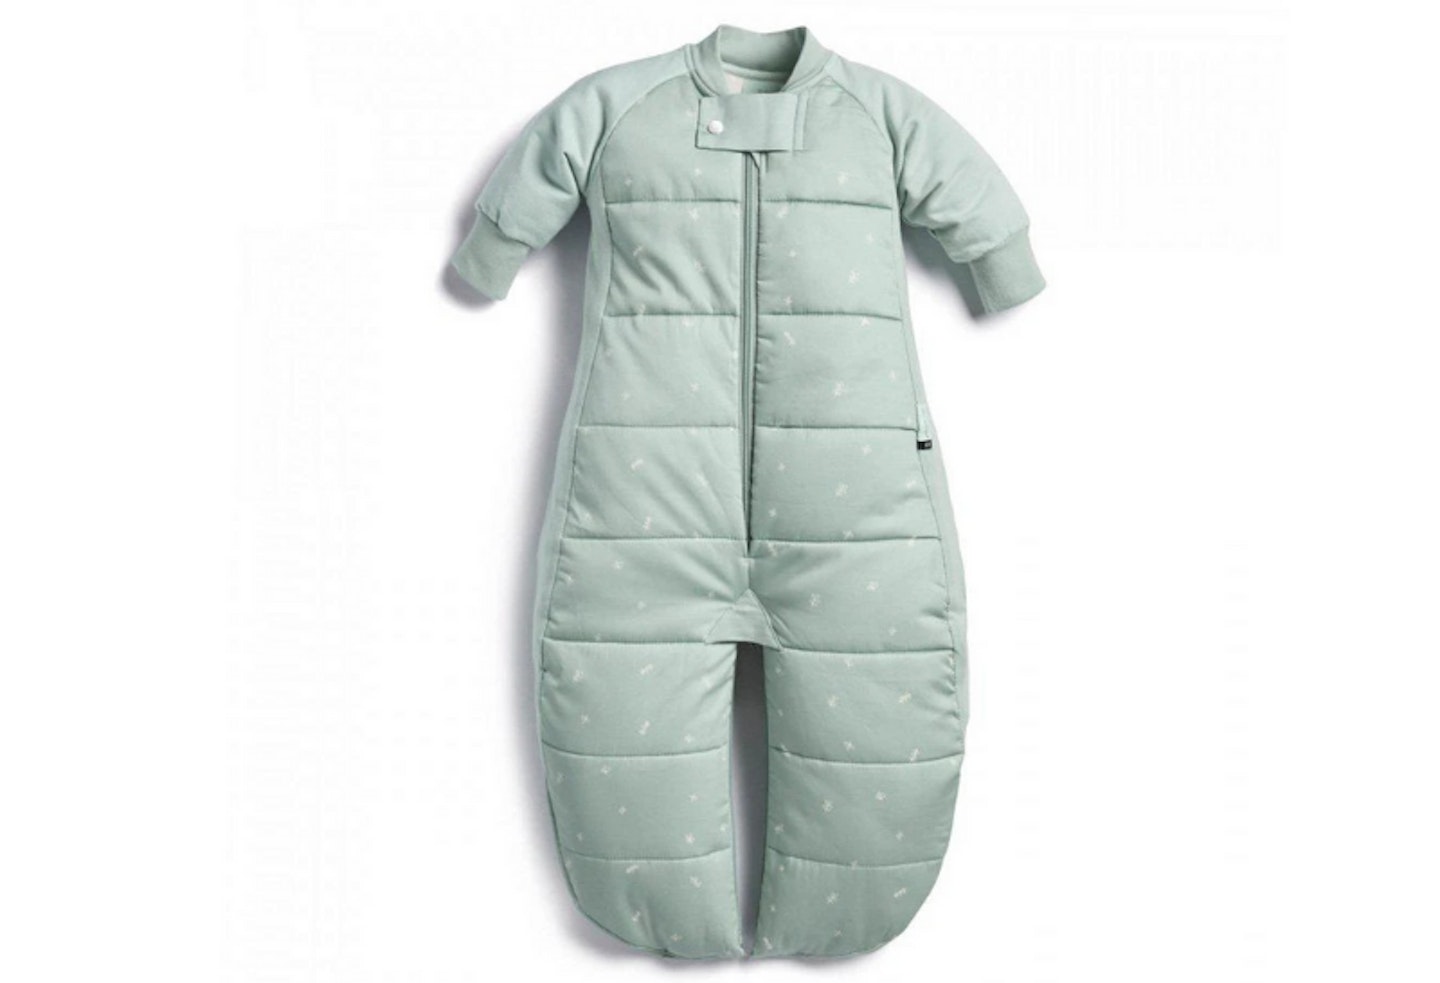 ergoPouch Sleep Suit Bag review